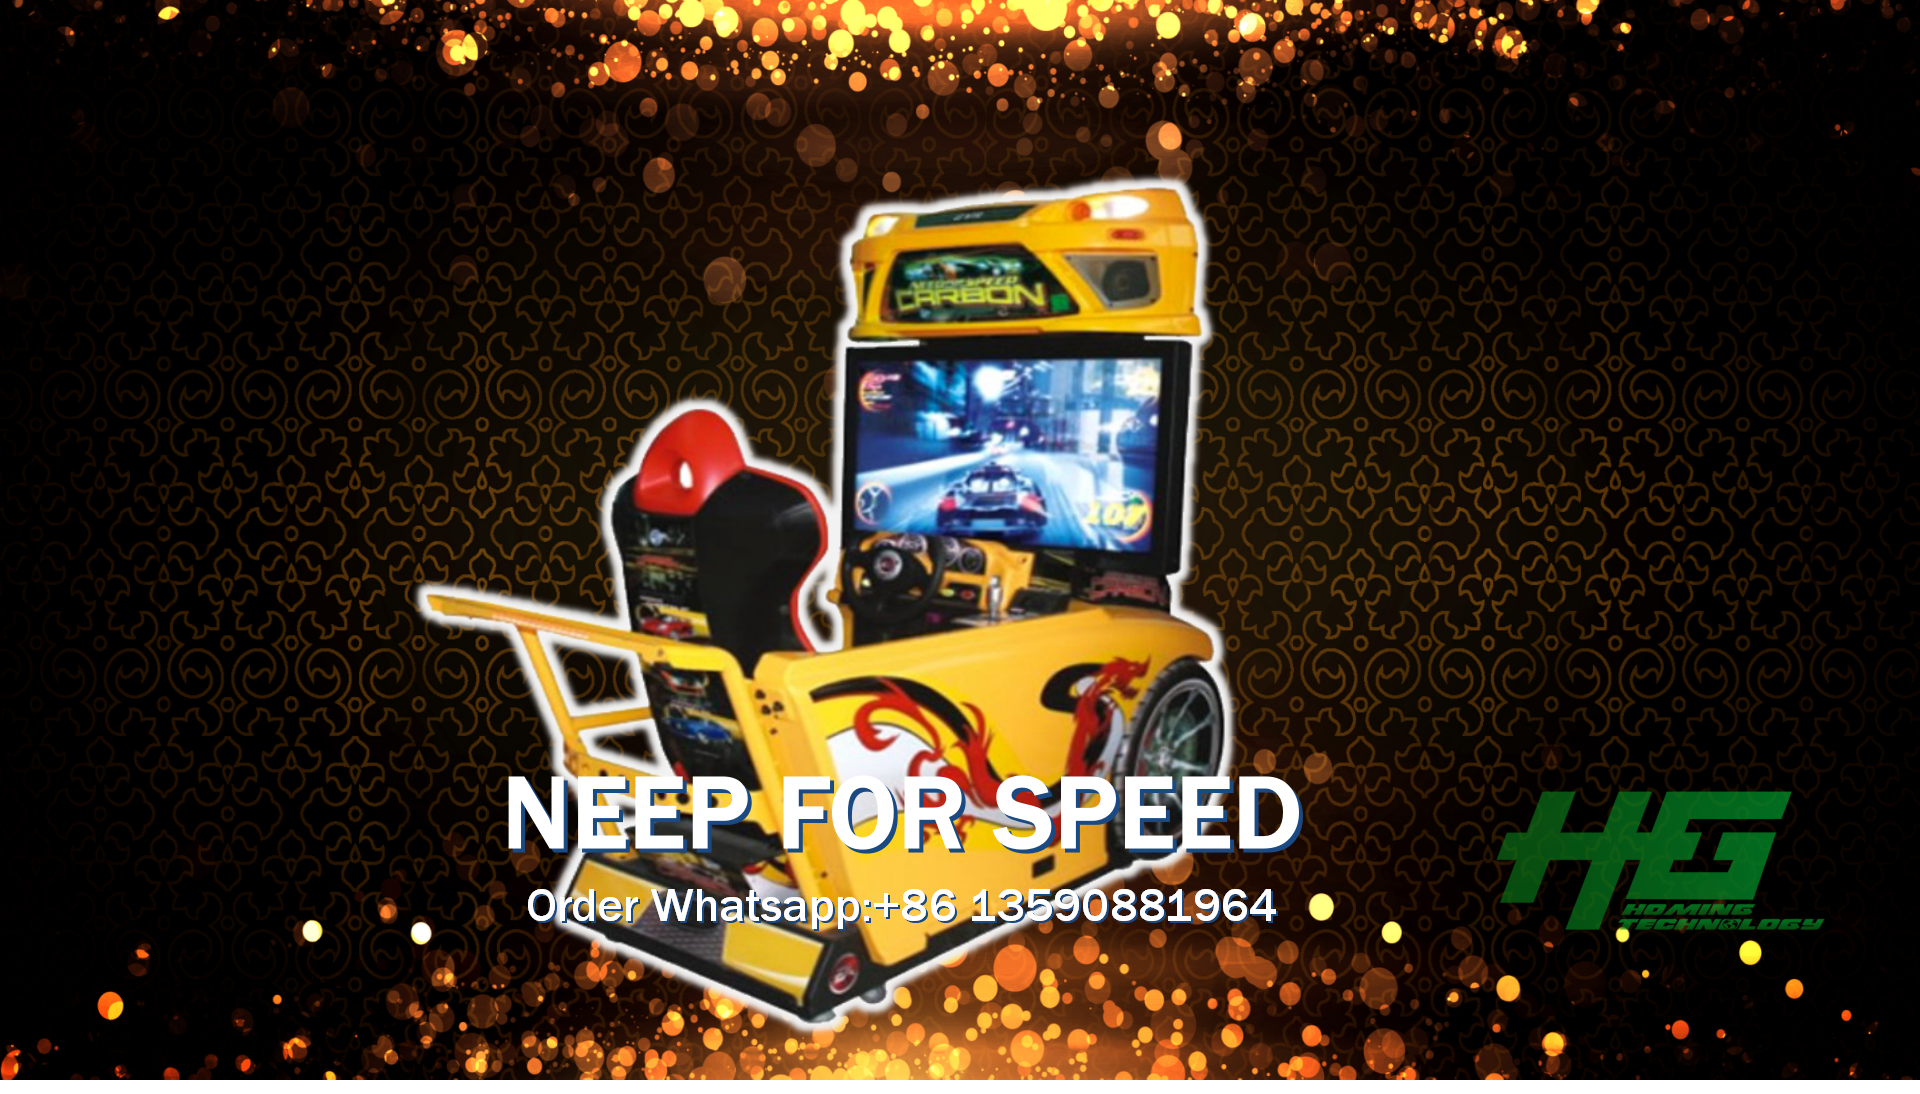 need for speed,need for speed racing game,need for speed arcade game,hummer arcade game machine,hummer racing game machine,hummer arcade video game,hummer arcade video,hummer racing car game,racing car game machine,arcade racing game machine,bulldozer arcade game,key master game machine,magic arrow game machine,mini key master,sega,sega arcade game,shooting water game machine,shooting water arcade game,game machine,new game machine,hot game machine,arcade game machine,prize game machine,prize vending machine,redemption game machine,indoor game machine,crane game machine,racing game machine,shooting game machine,simulator game machine,vr simulator,video arcade game,kids game machine,kids rides carousel,fish game machine,fishing game machine,slot machine,casino machine,kids rides,kids rides arcade game,kids rides racing game,kids rides simulator game,kids rides indoor game,kids rides video game,kids rides swing game,racing game,racing arcade game,arcade racing game,racing car game,racing simulator game,indoor racing game,video racing game,video racing arcade game,kids racing game,shooting game machine,arcade shooting game,shooting gun game,video shooting game,simulator shooting game,indoor shooting game,shooting arcade game,shooting video game,shooting simulator game,ocean carousel,kids rides carousel,mini carousel,hominggame,gametube